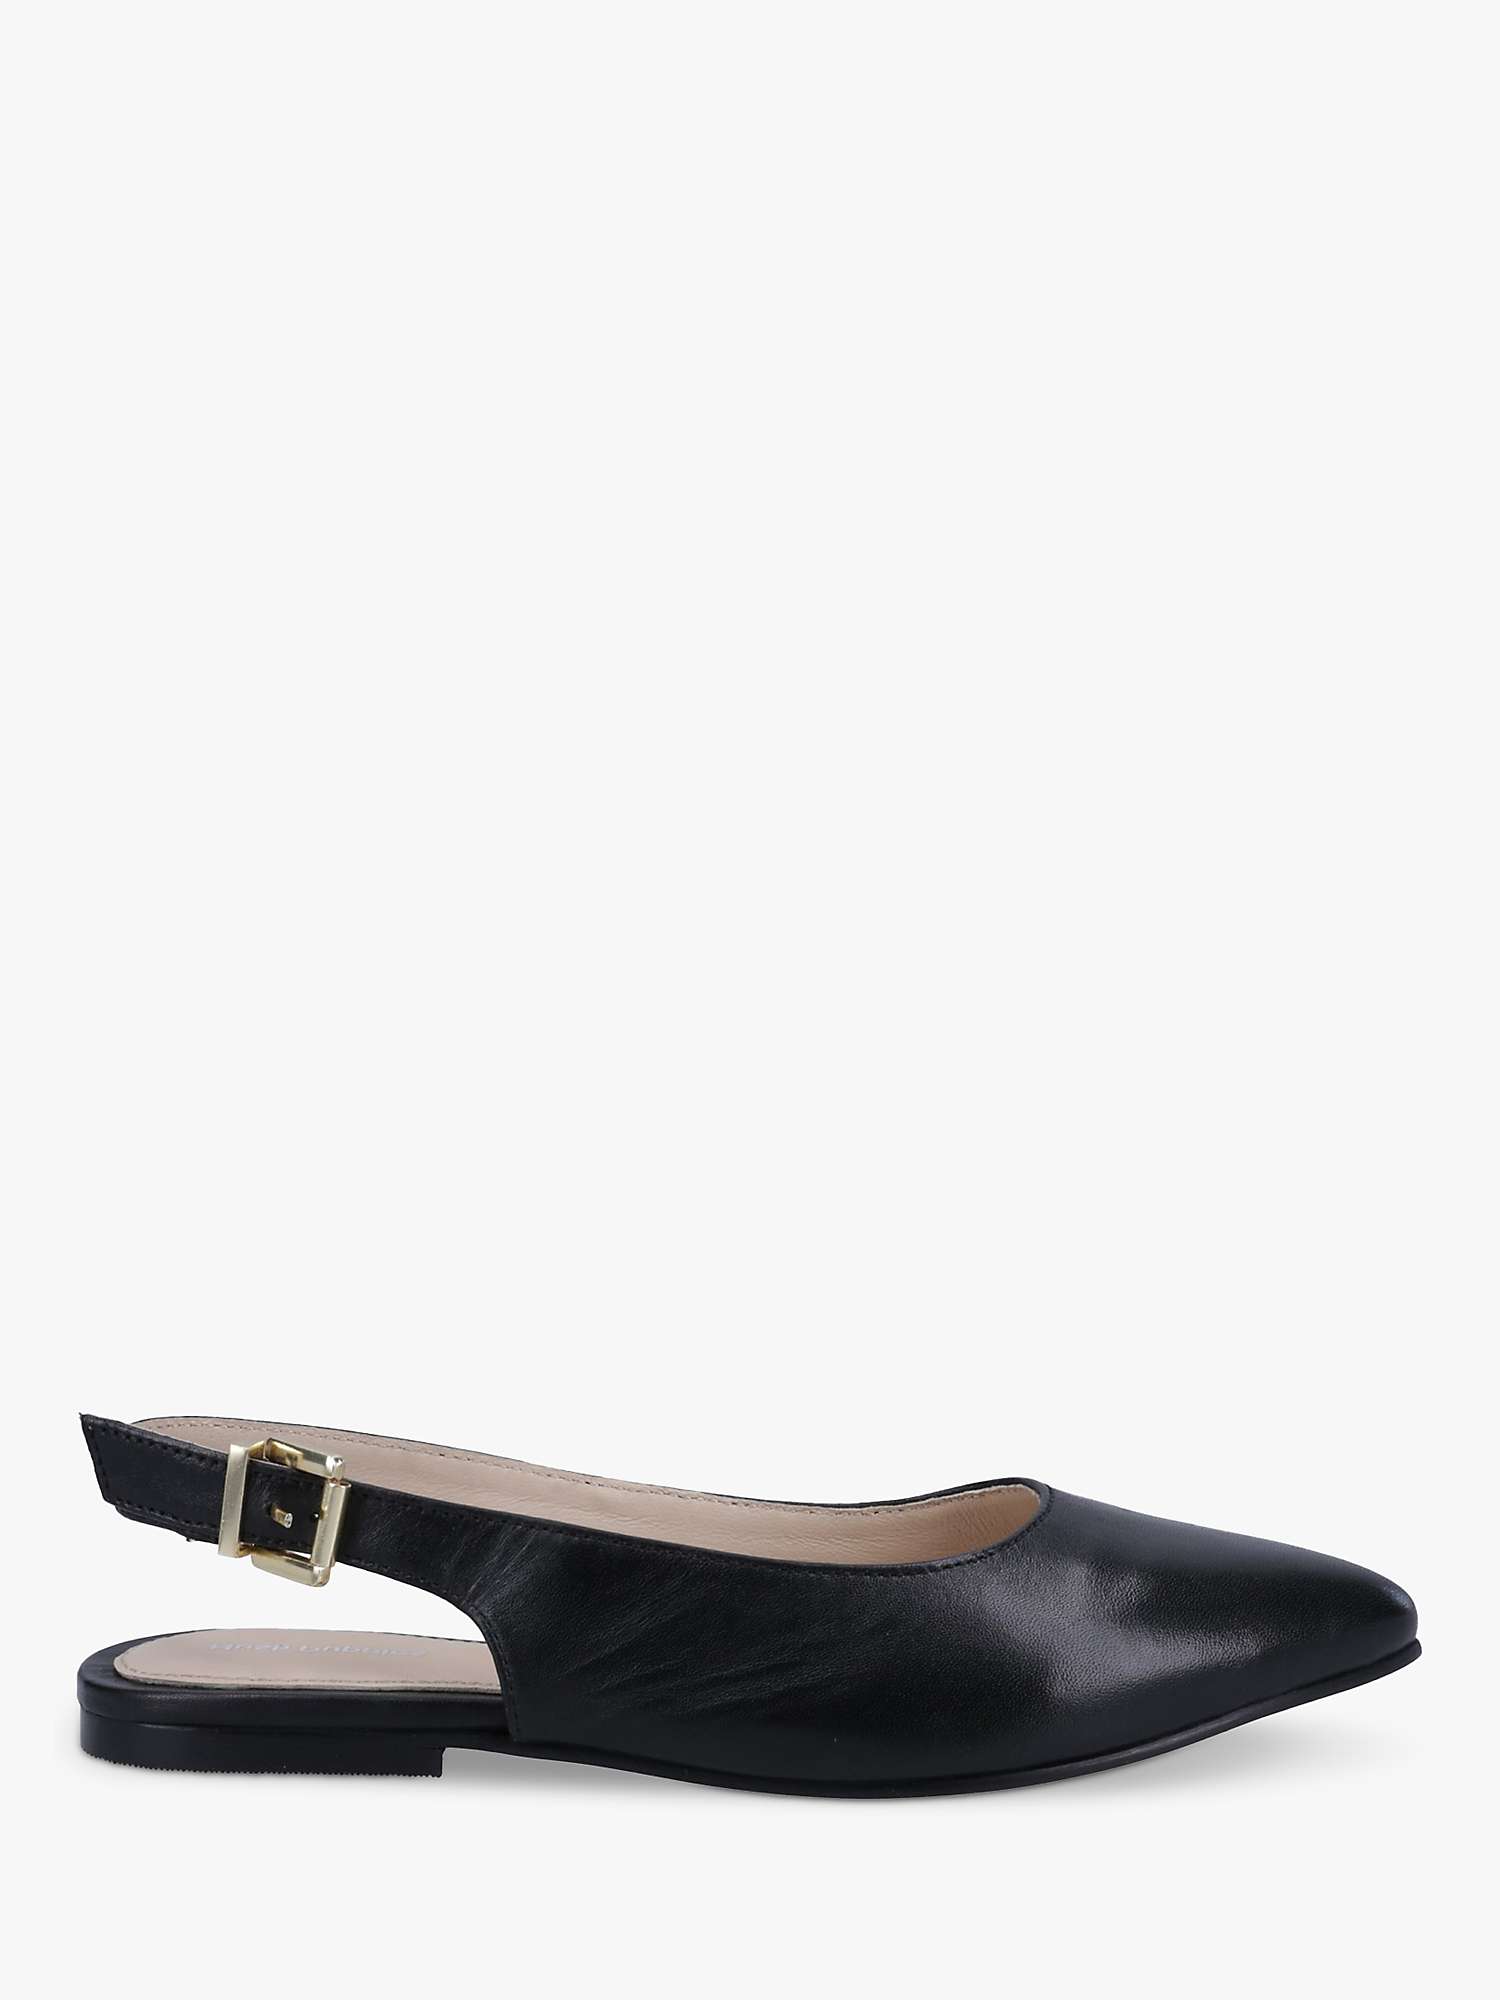 Buy Hush Puppies Demi Leather Slingback Pumps Online at johnlewis.com